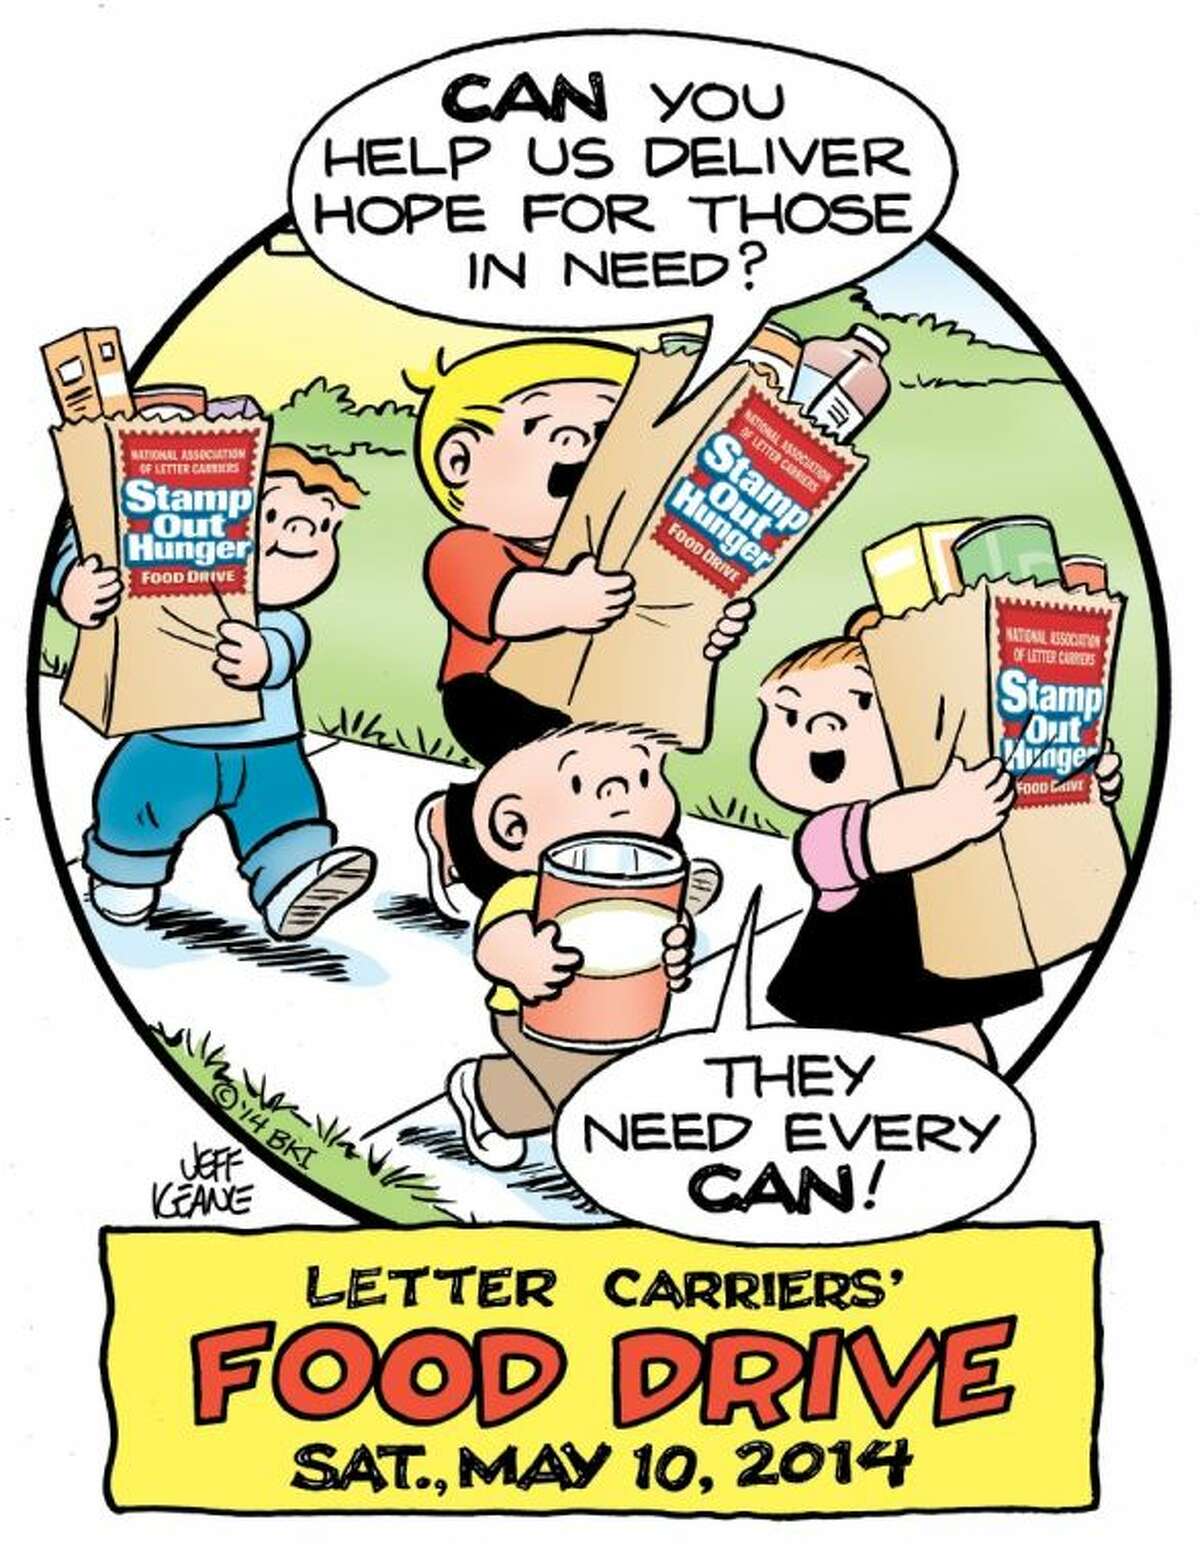 The Stamp Out Hunger food drive is held on the second Saturday of May. This year it will be May 10.